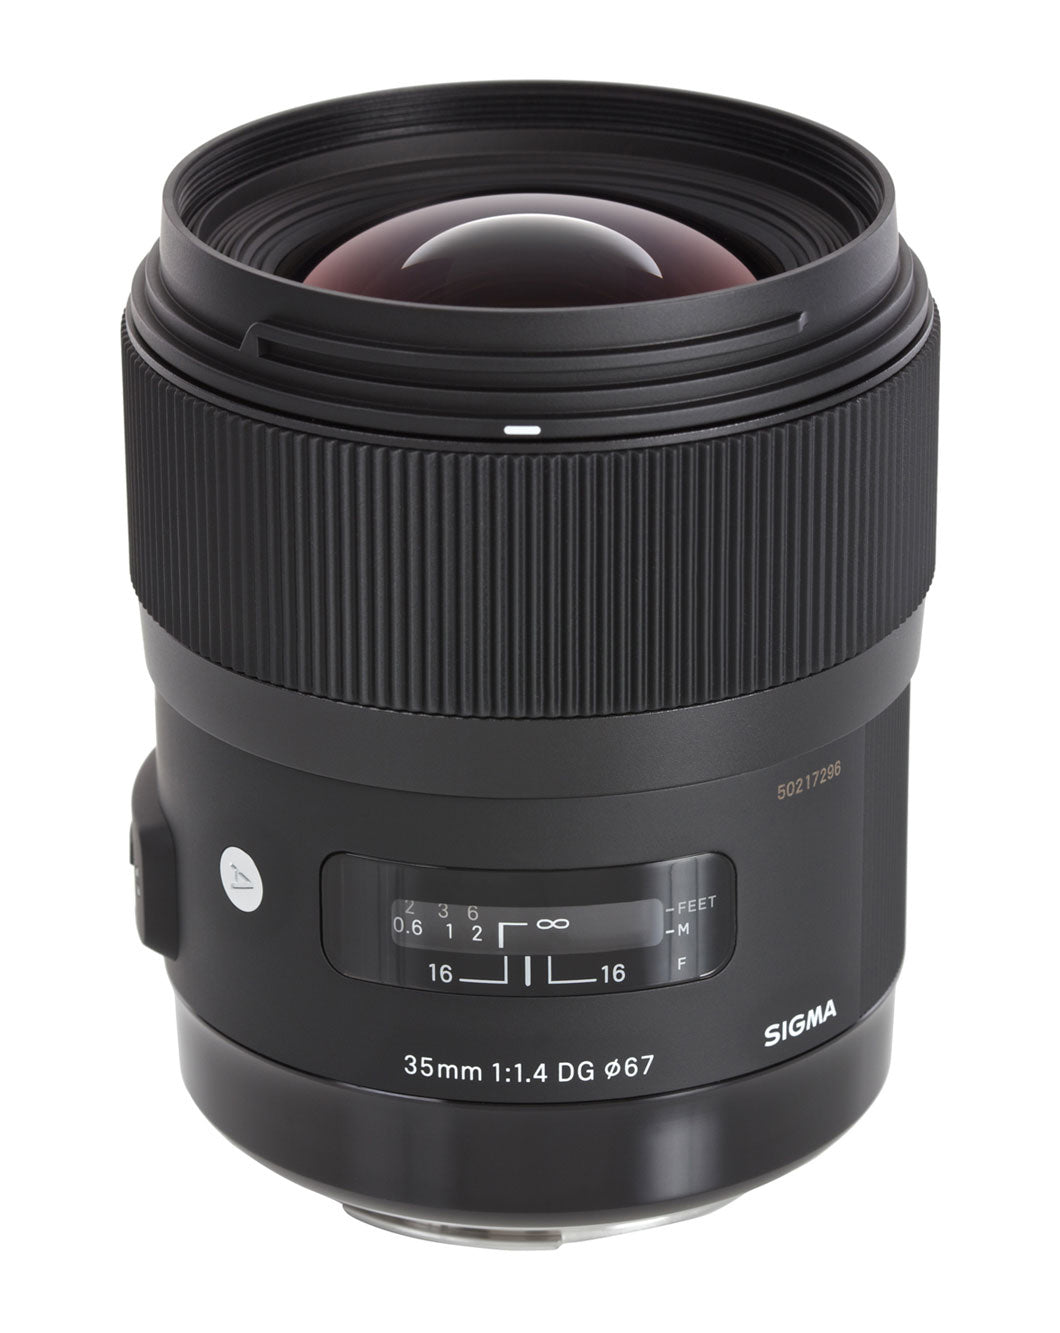 Sigma 35mm f/1.4 DG HSM Wide Angle Telephoto Lens for Canon EF Mount - maplin.co.uk